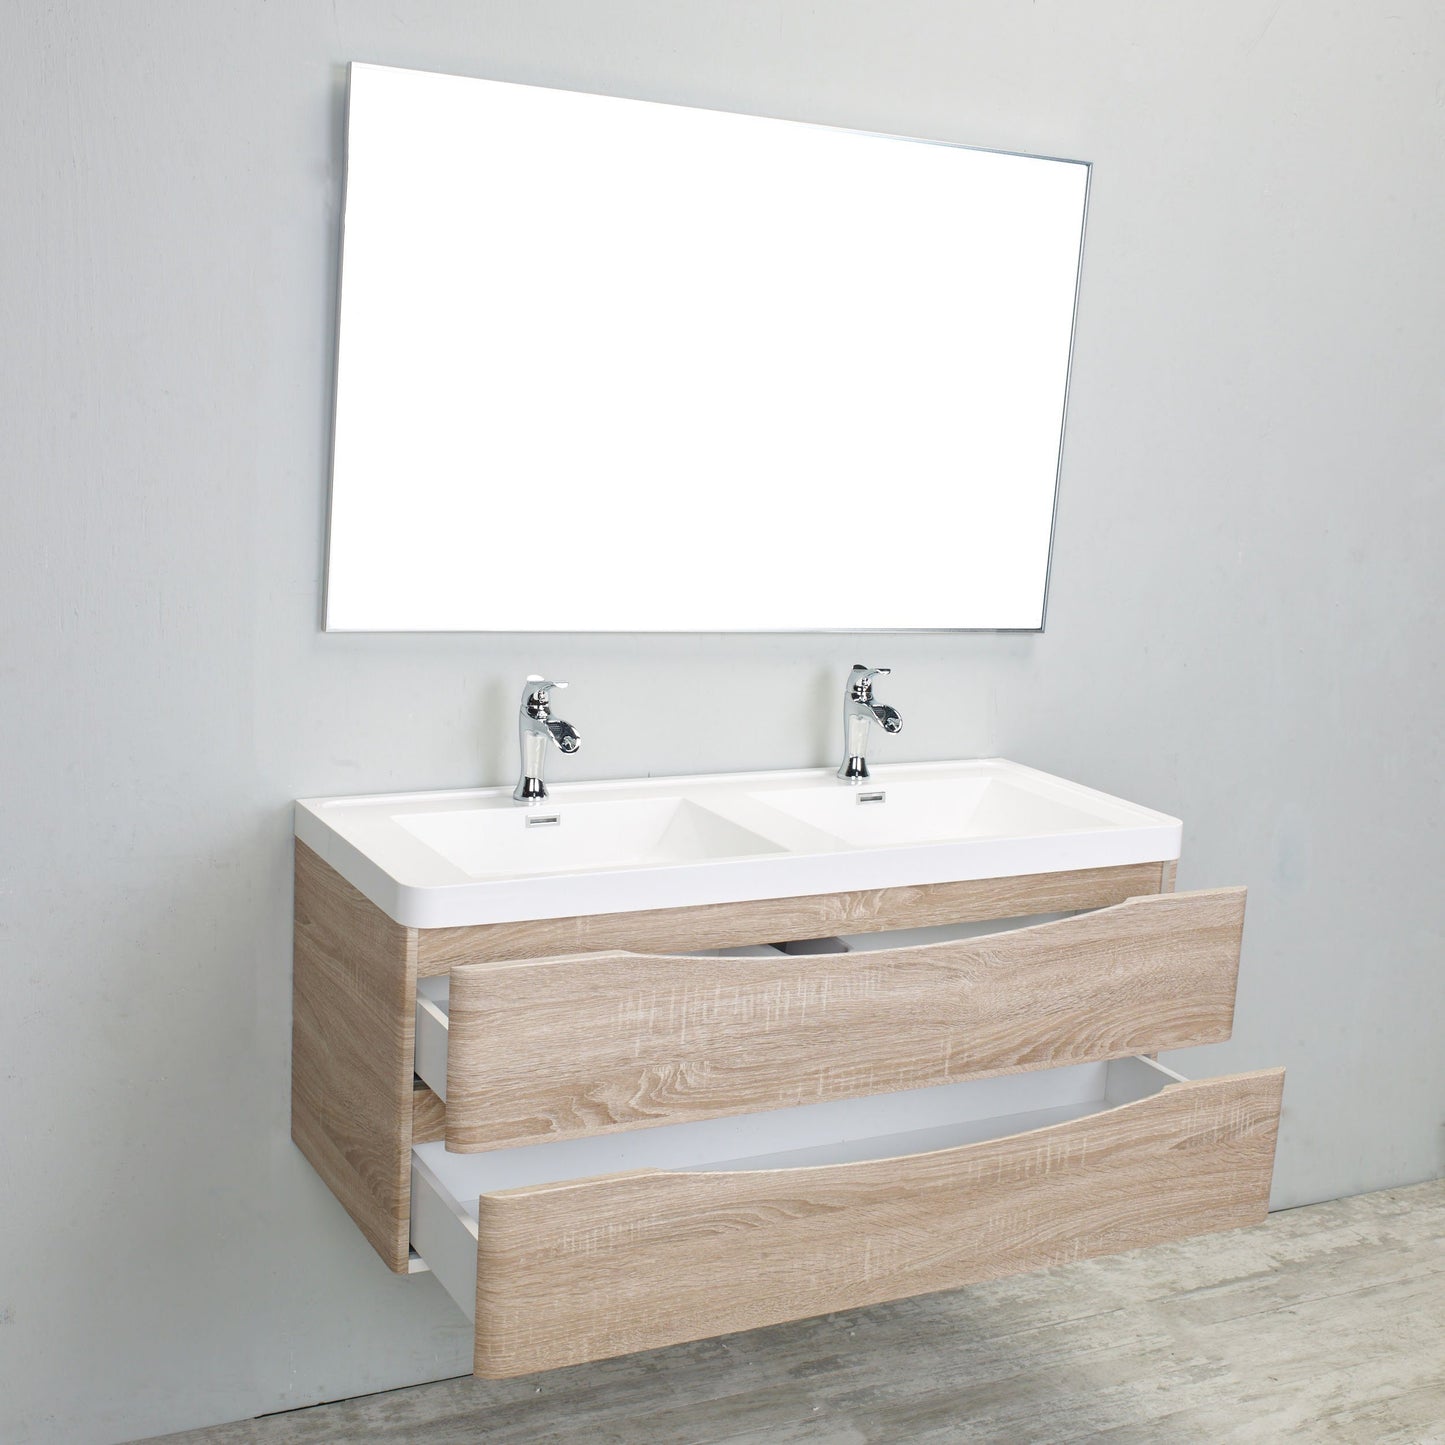 Eviva Smile 48" Modern Bathroom Vanity Set with Integrated White Acrylic Double Sink Wall Mount - Luxe Bathroom Vanities Luxury Bathroom Fixtures Bathroom Furniture